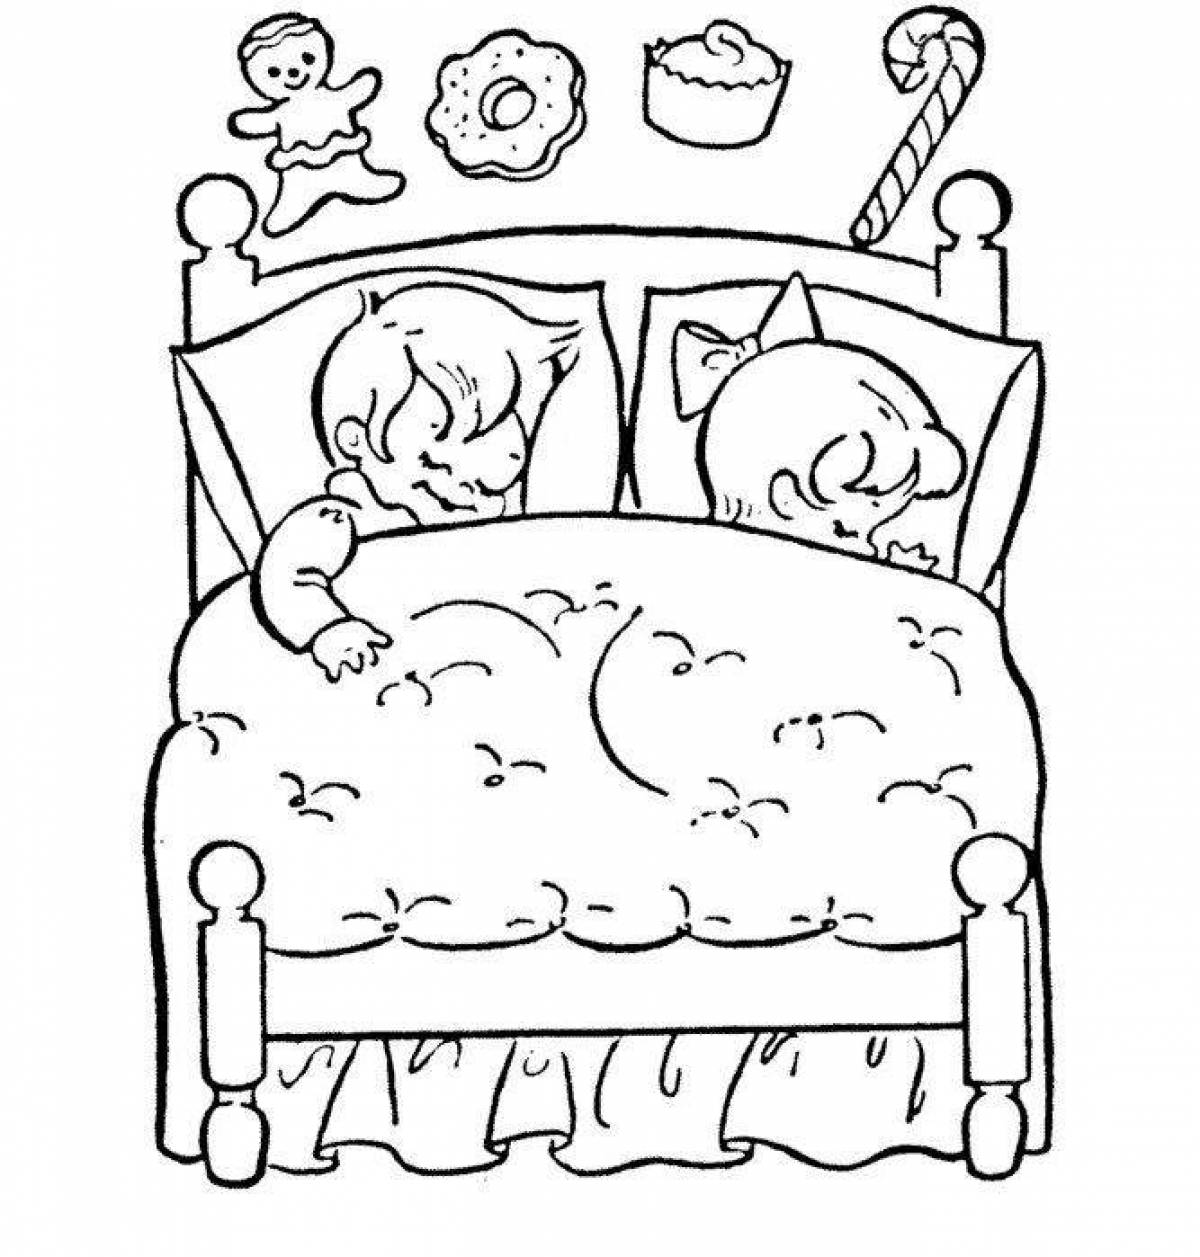 Charming dream coloring book